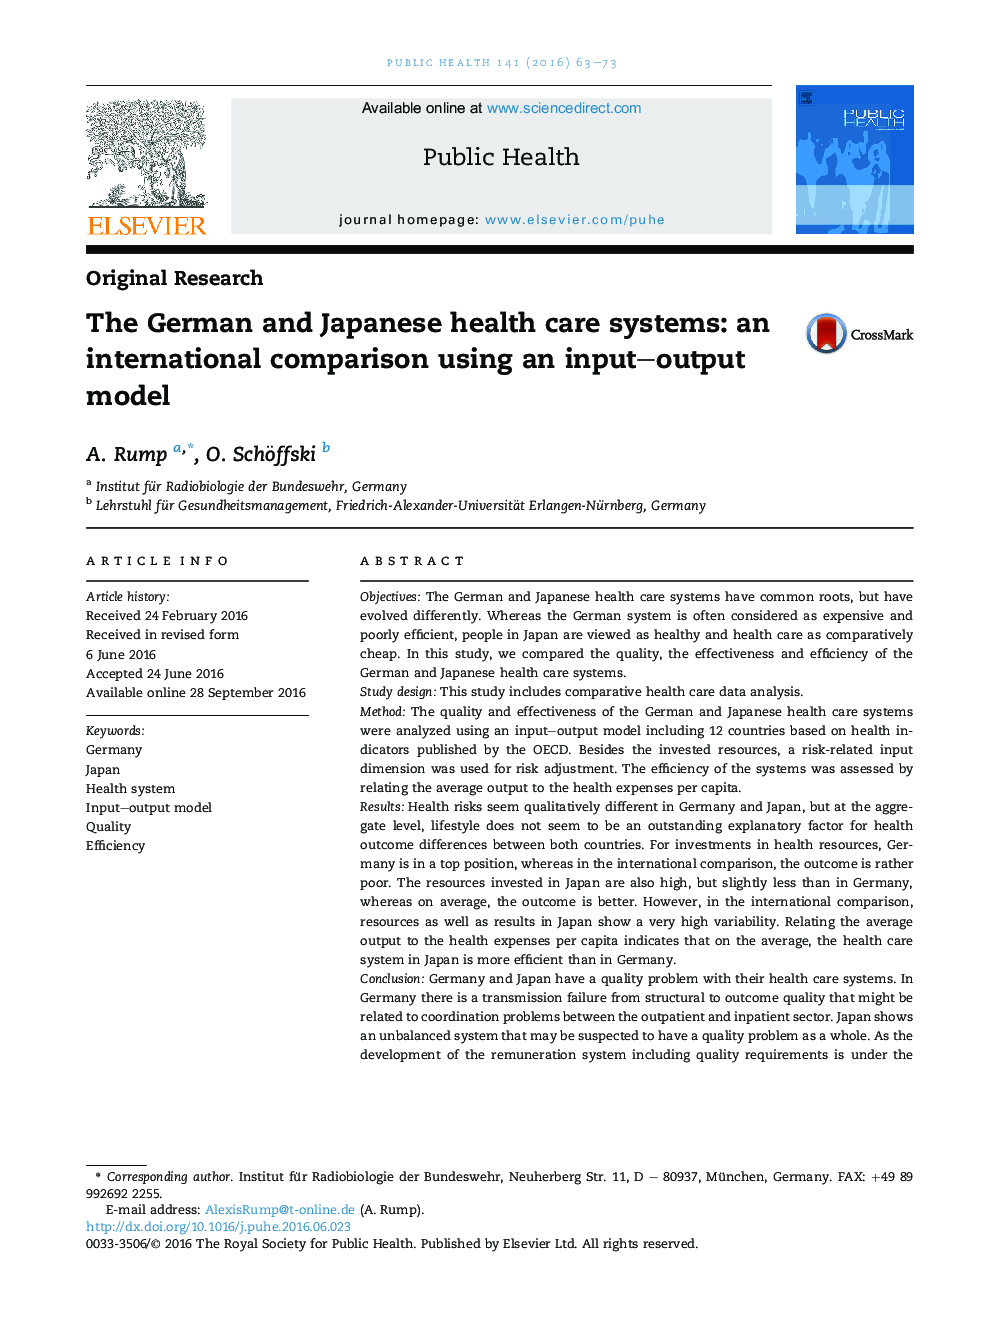 The German and Japanese health care systems: an international comparison using an input-output model